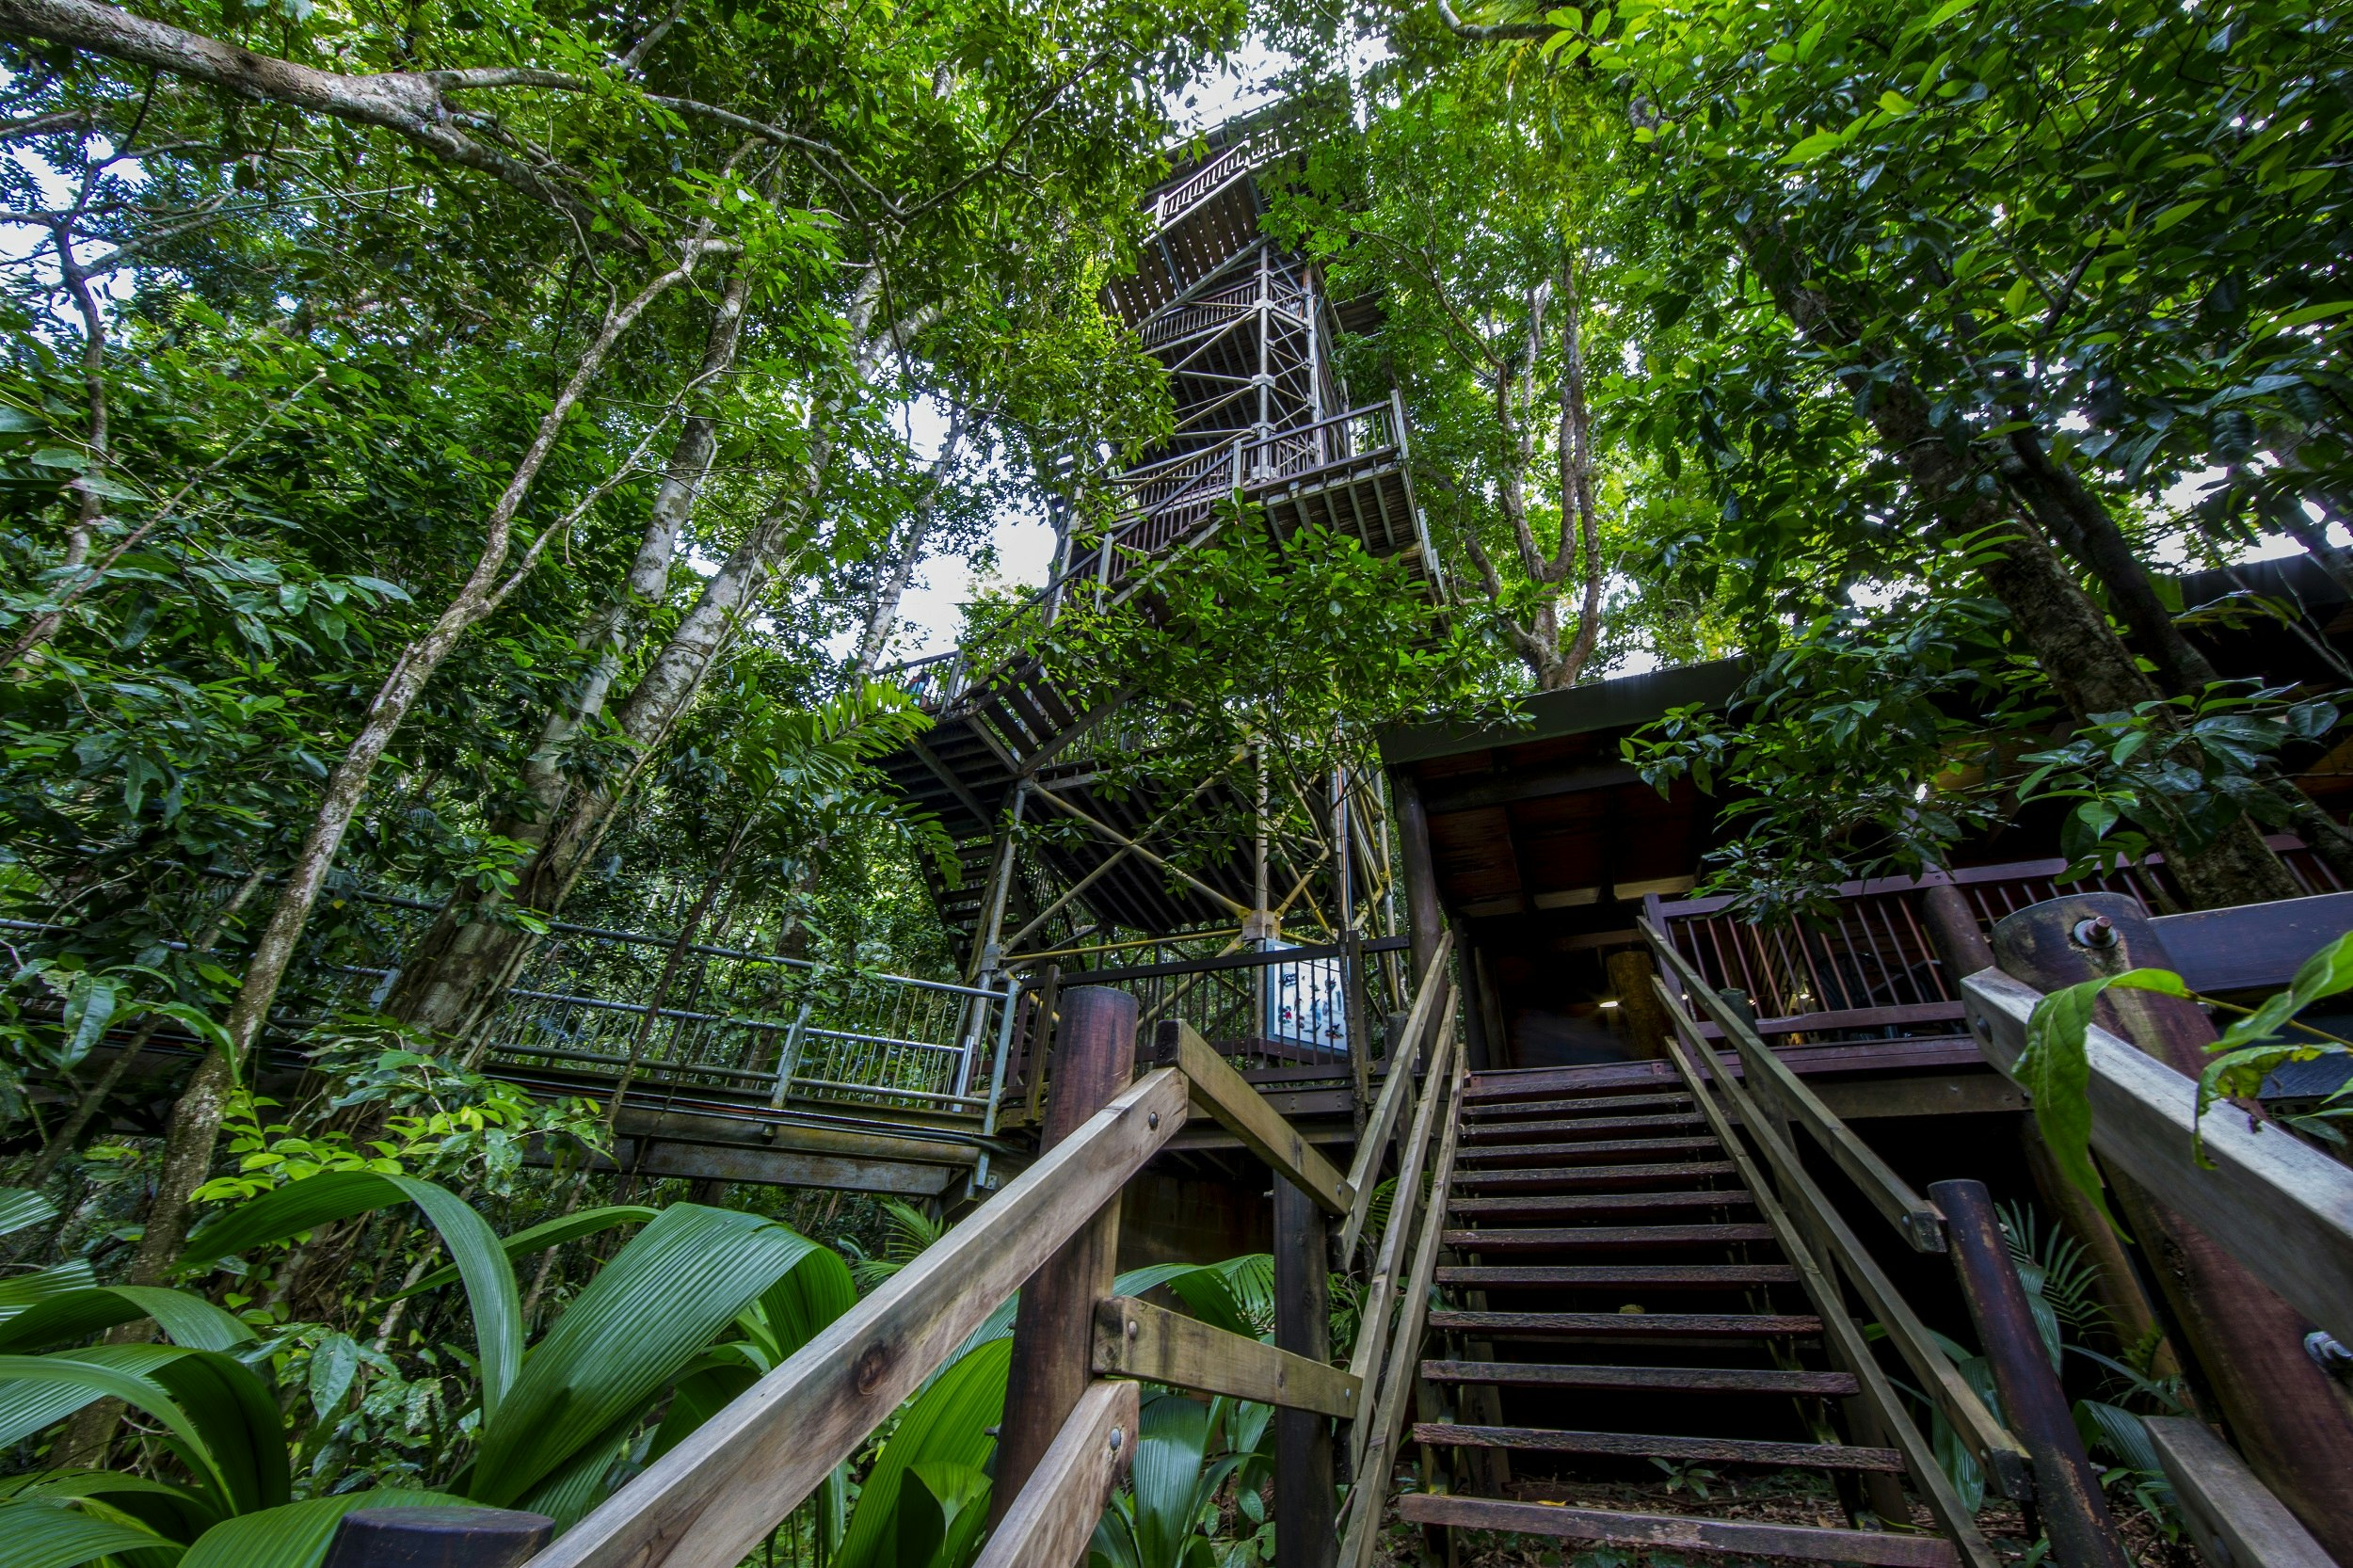 Wooden steps lead up through the forest to the bottom of a tower, which has a set of zigzagging steps that climb to the tree tops.